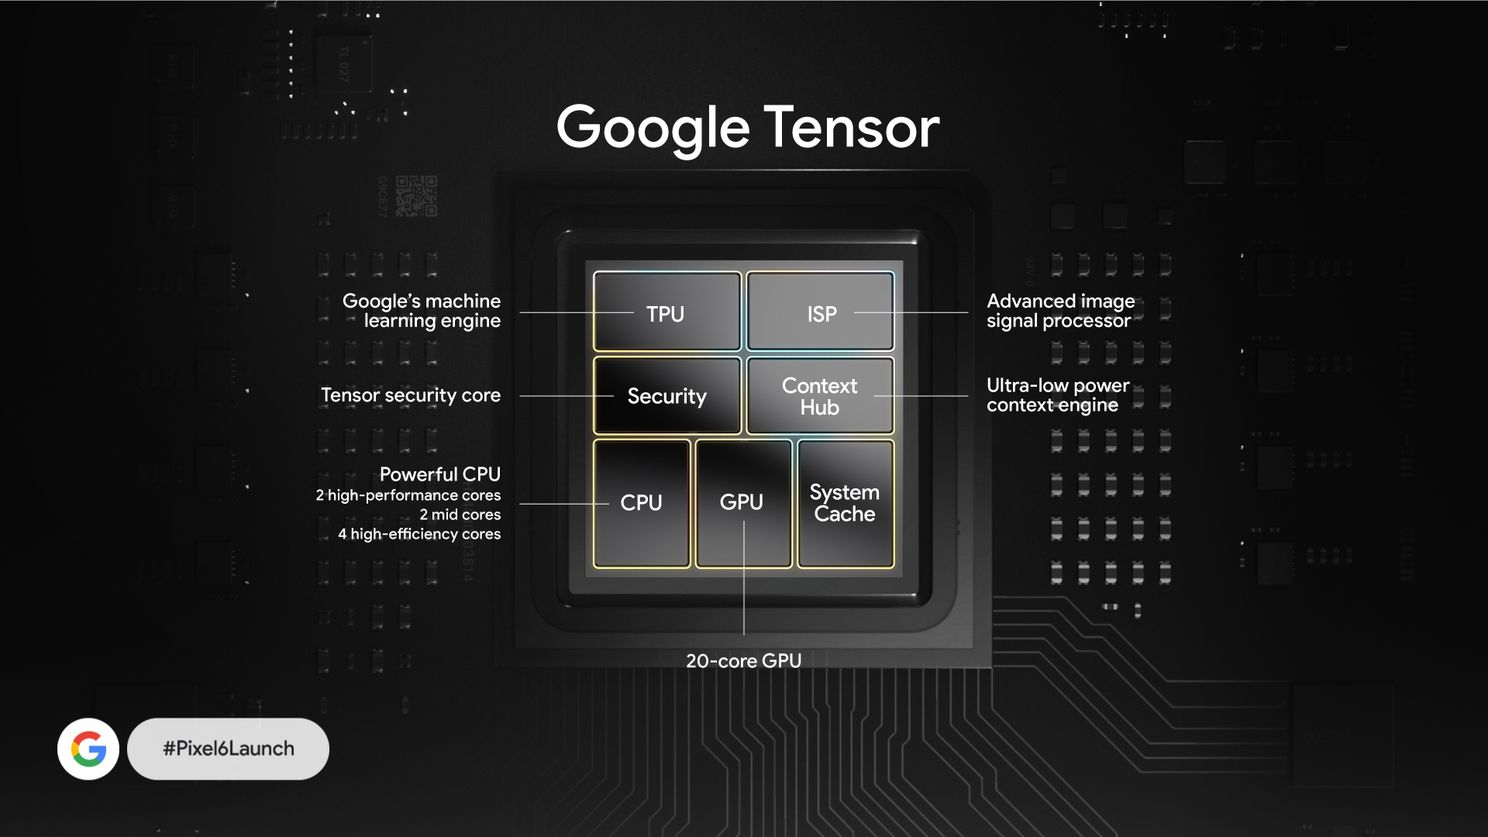 Google Tensor: everything you want to know about the smart processor